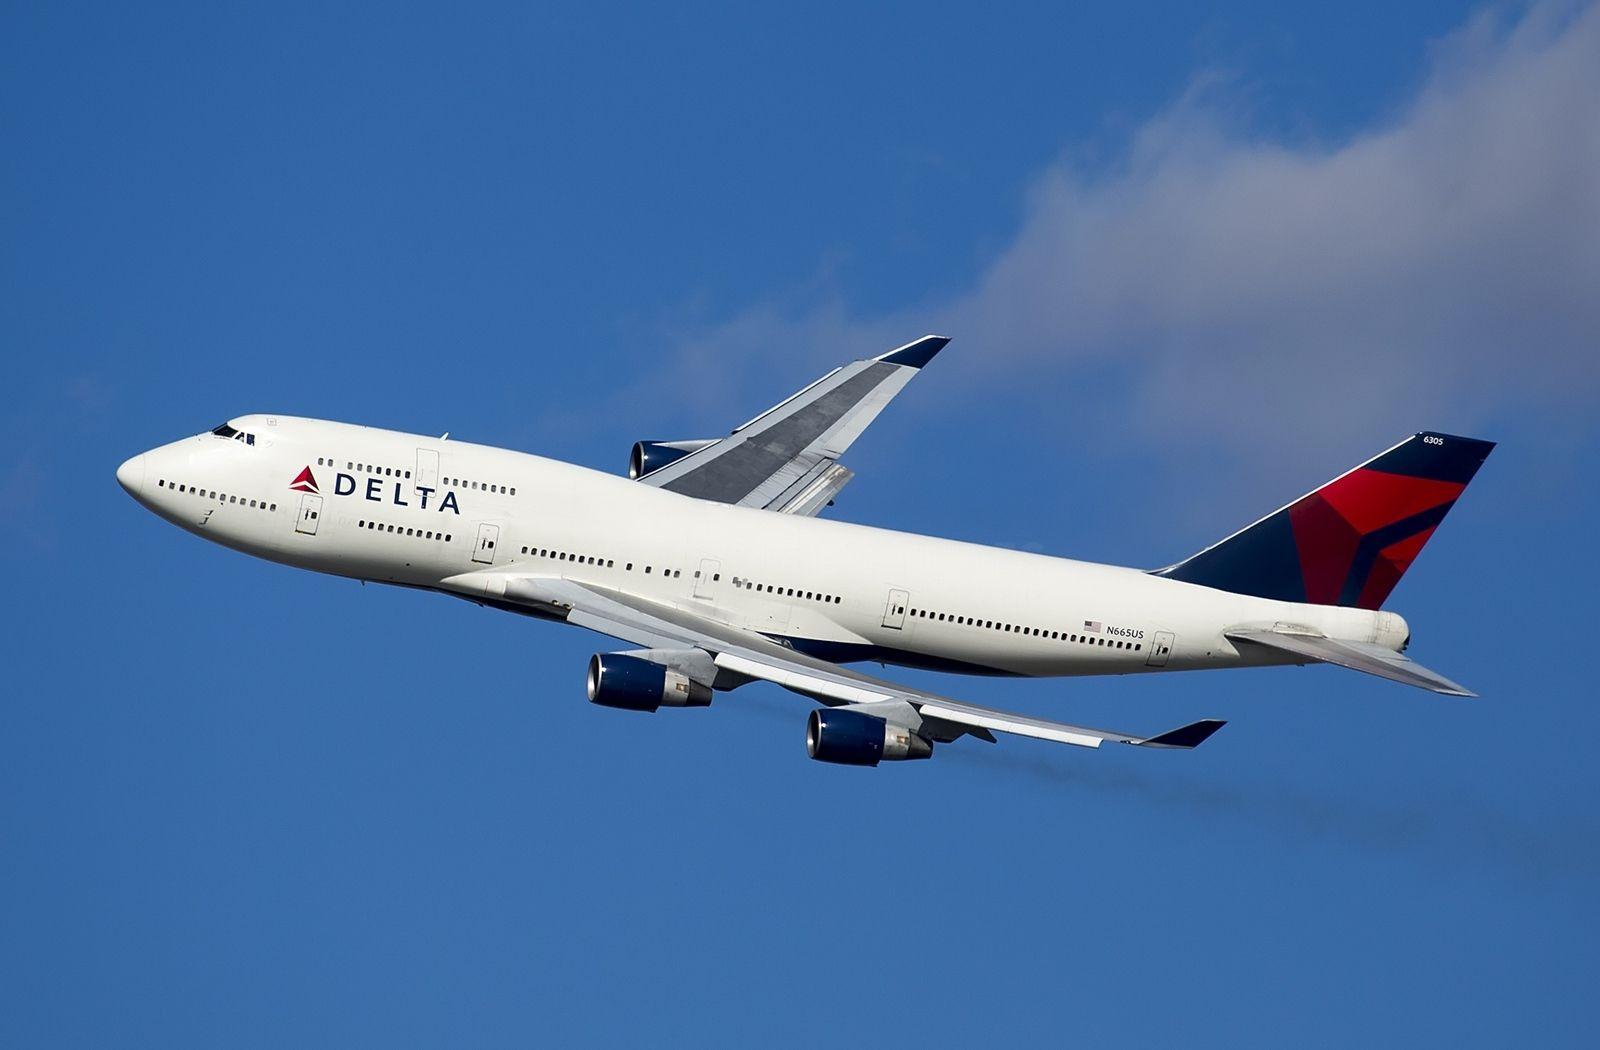 Boeing 747 400 Of Delta Airlines Inflight Aircraft Wallpaper 3381